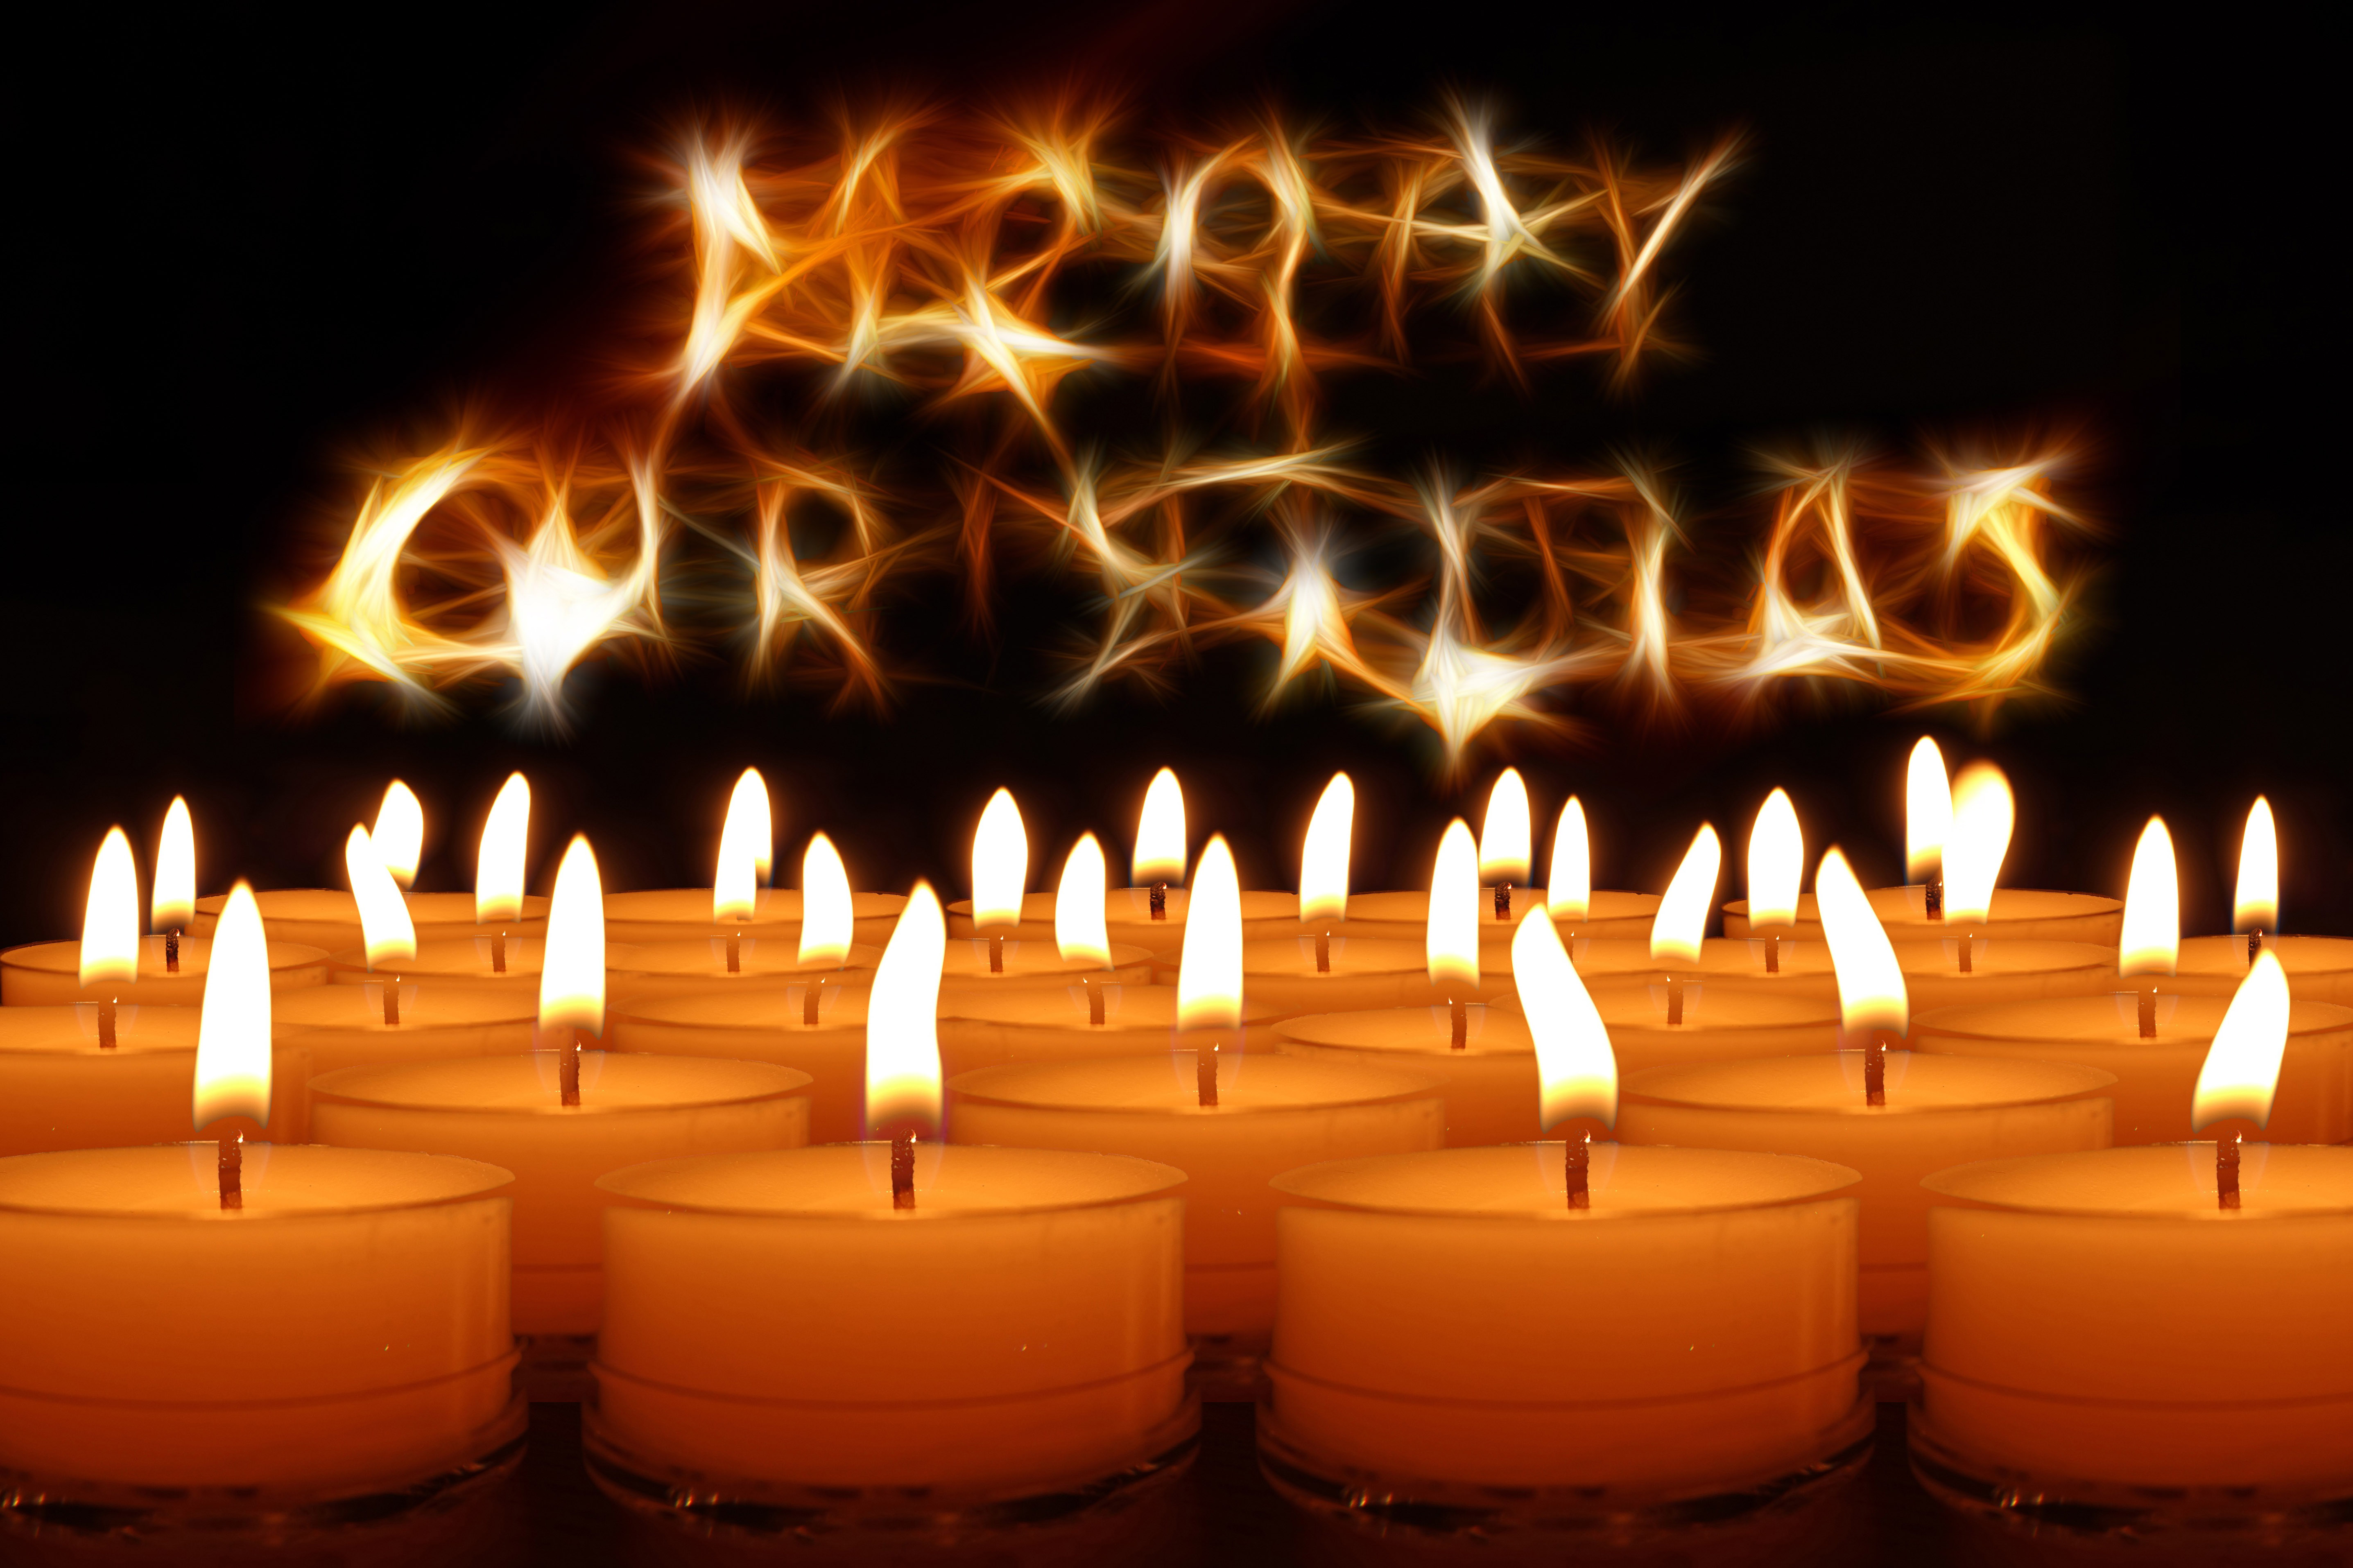 candles-merry-christmas-images-free-download-free-textures-photos-background-images